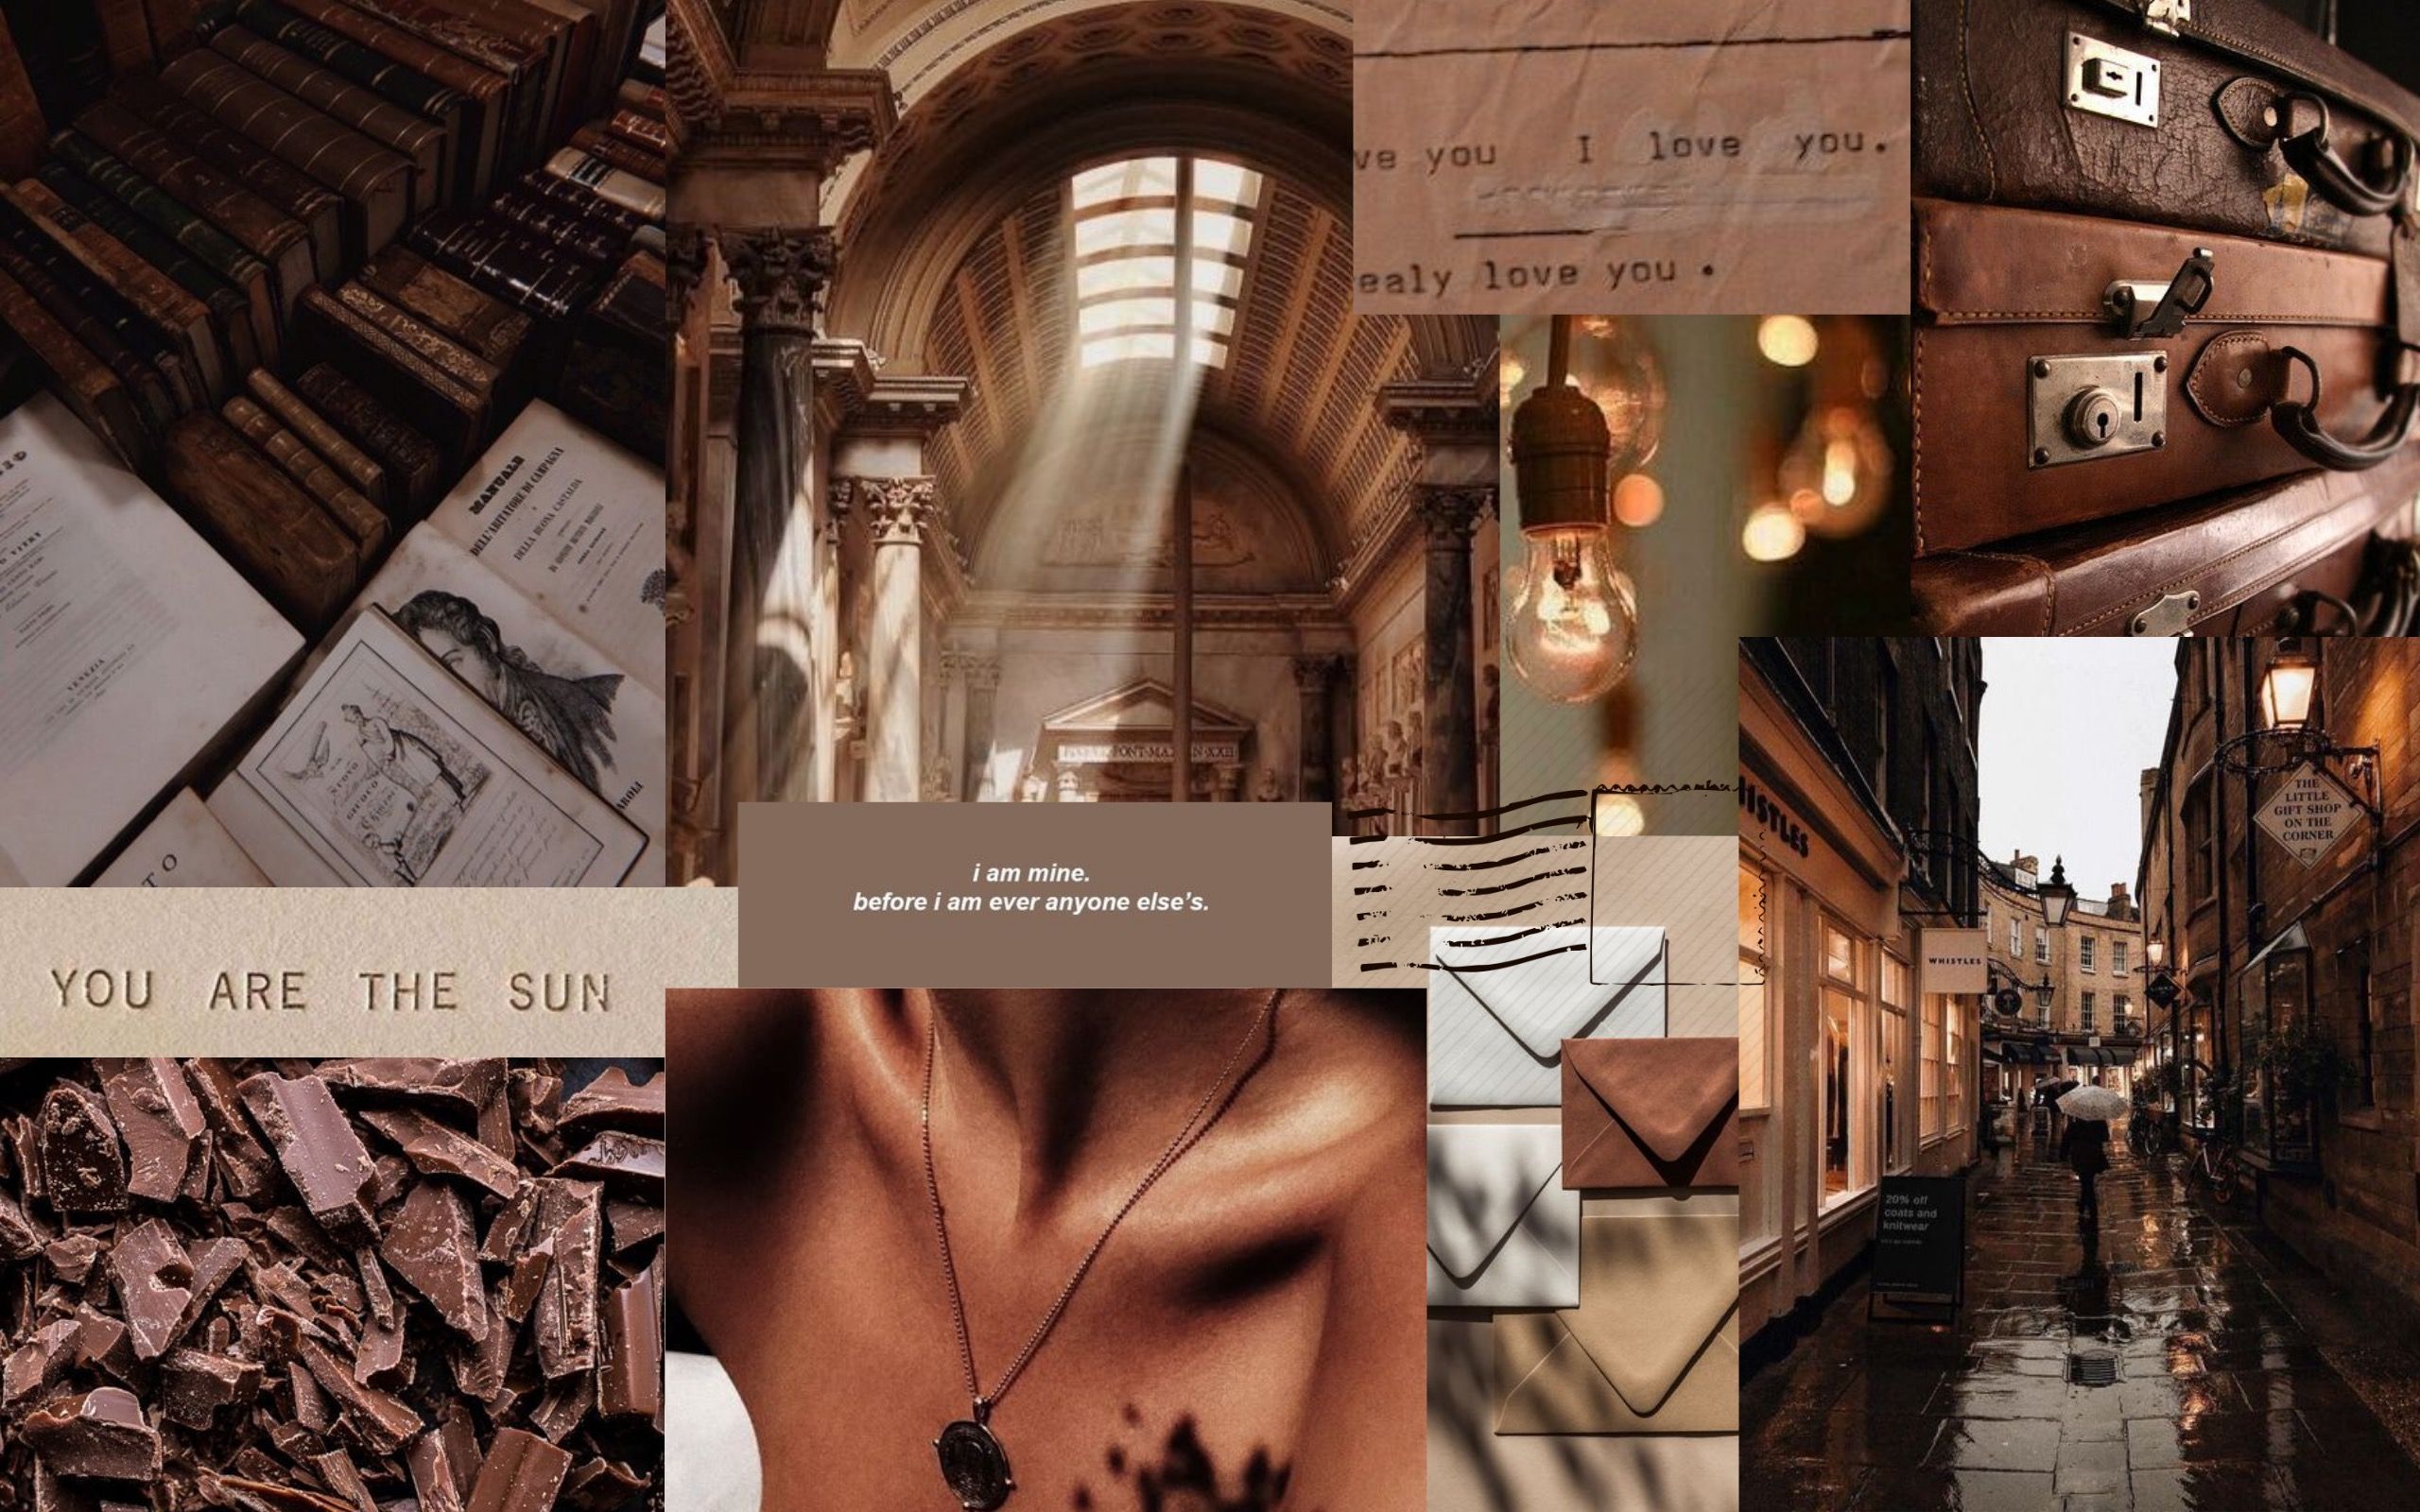 A collage of photos including books, a necklace, a lightbulb, and a brown aesthetic. - Light academia, dark academia